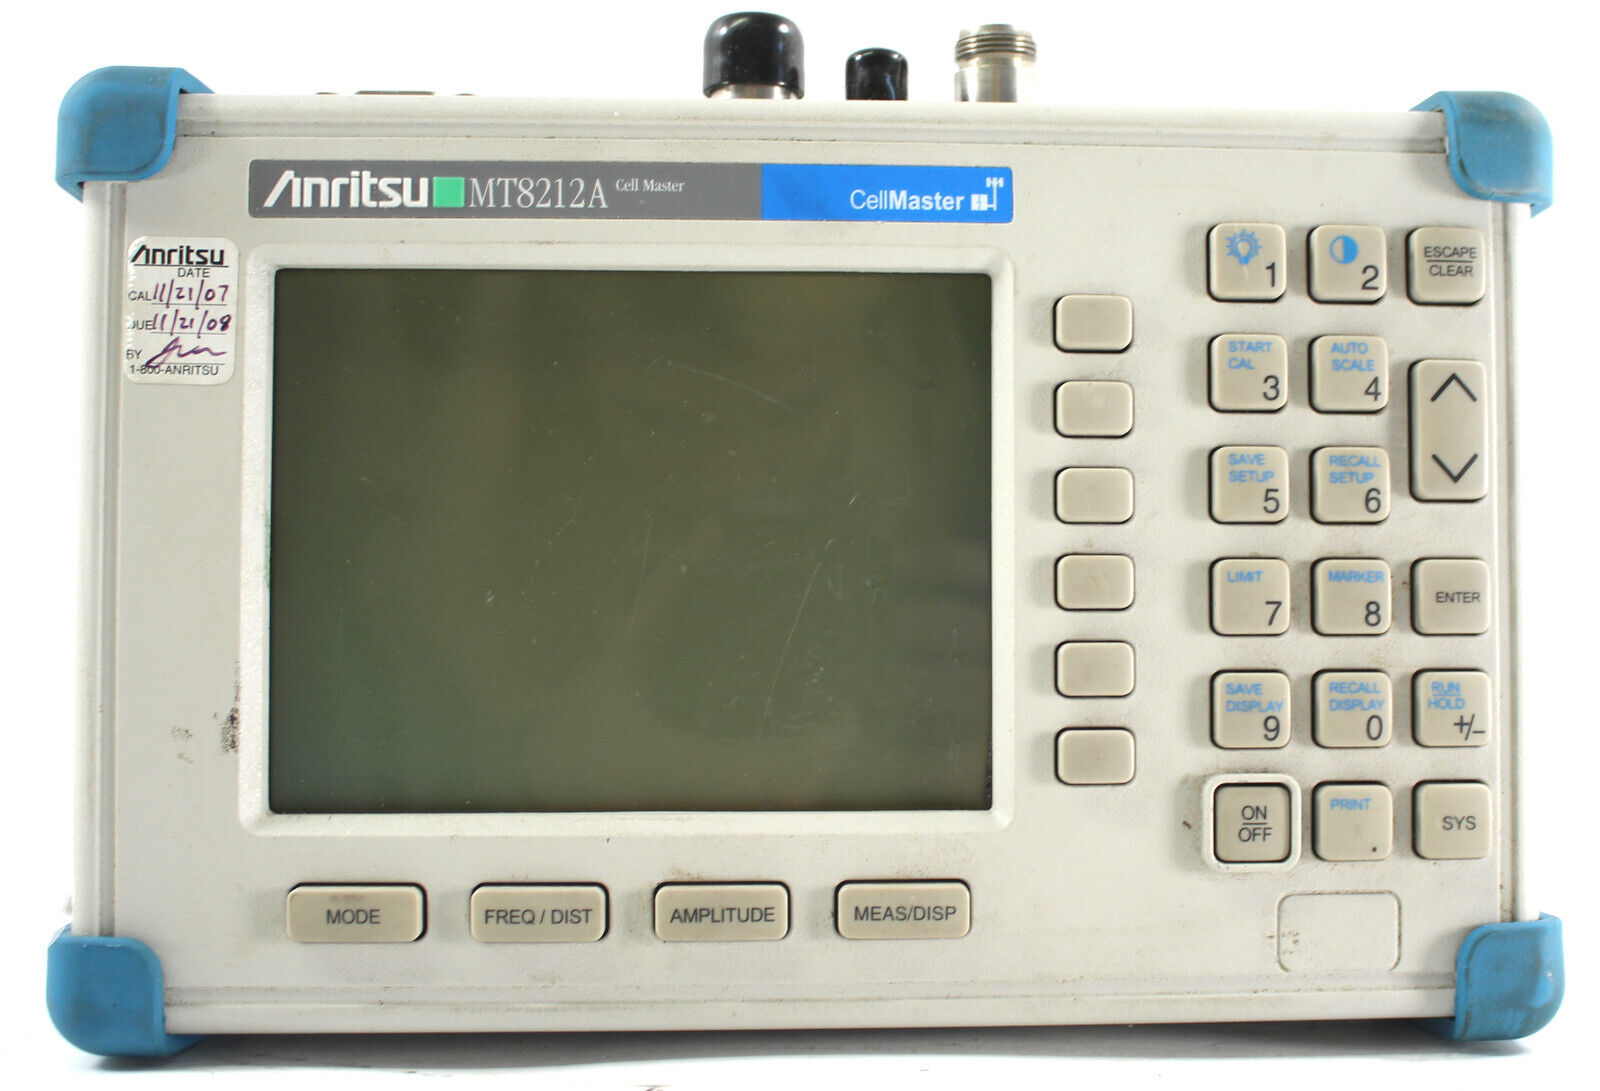 Anritsu MT8212A Cell Master 25MHz to 4GHz - AS IS (Bad Screen)